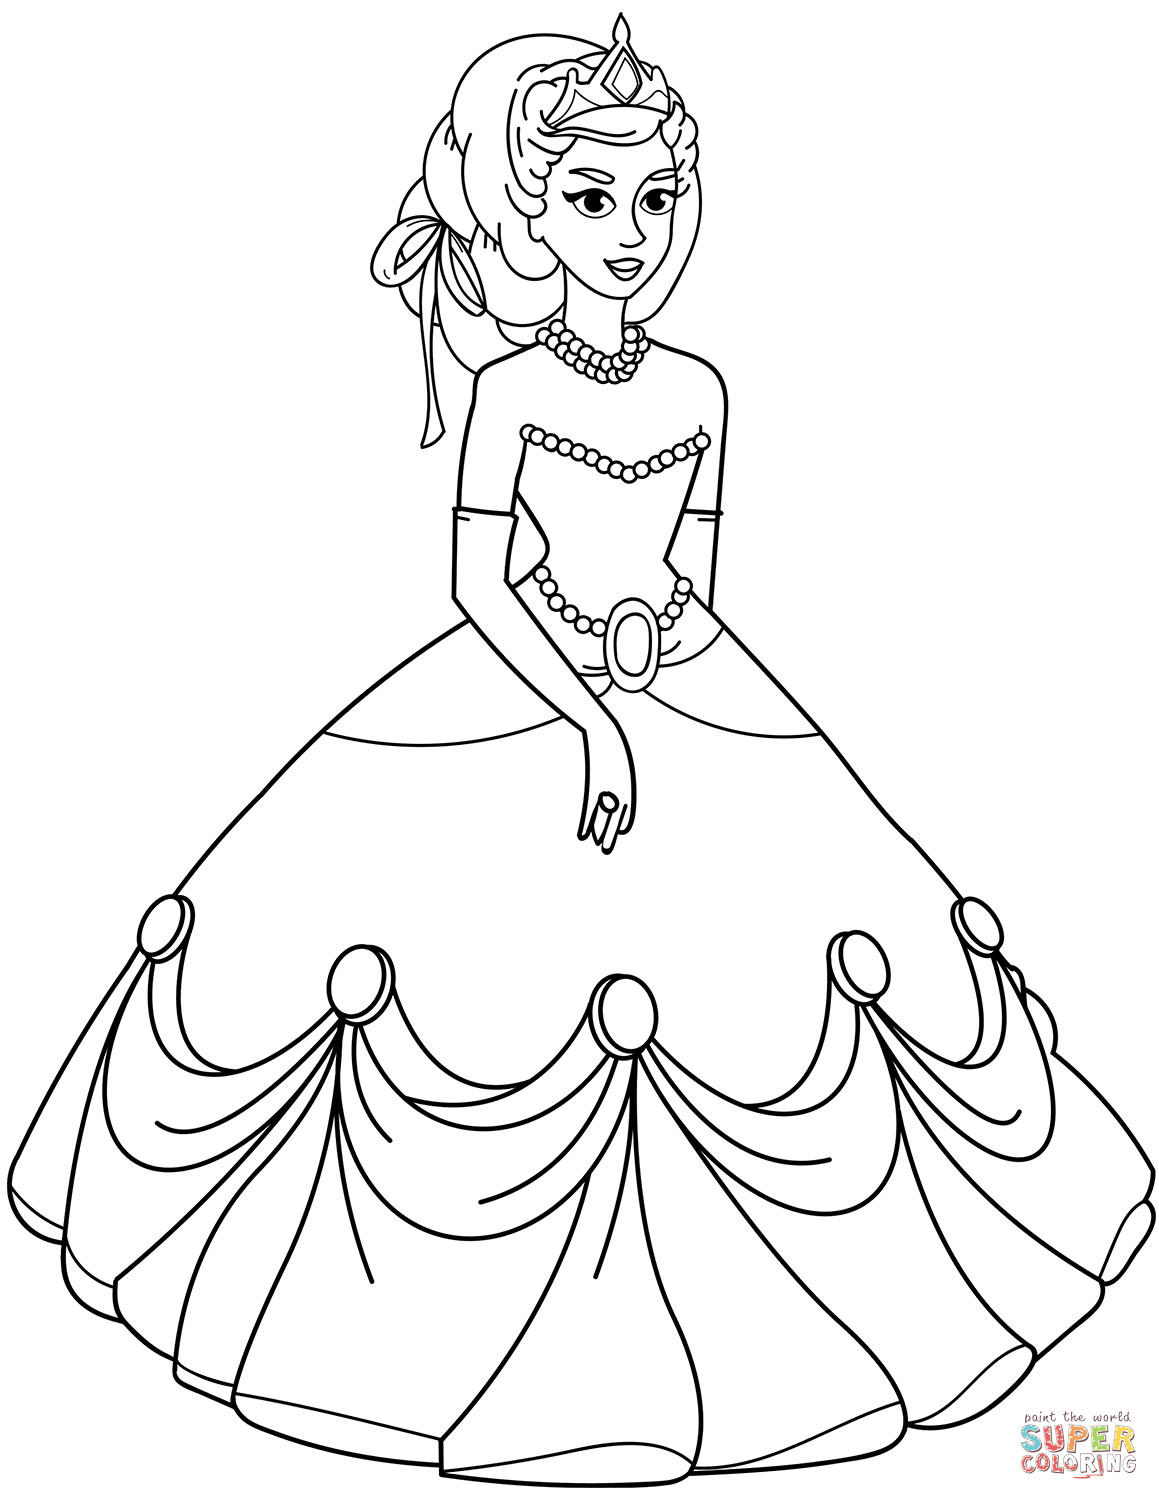 Coloring Pages For Kids Princesses
 Princess in Ball Gown Dress coloring page